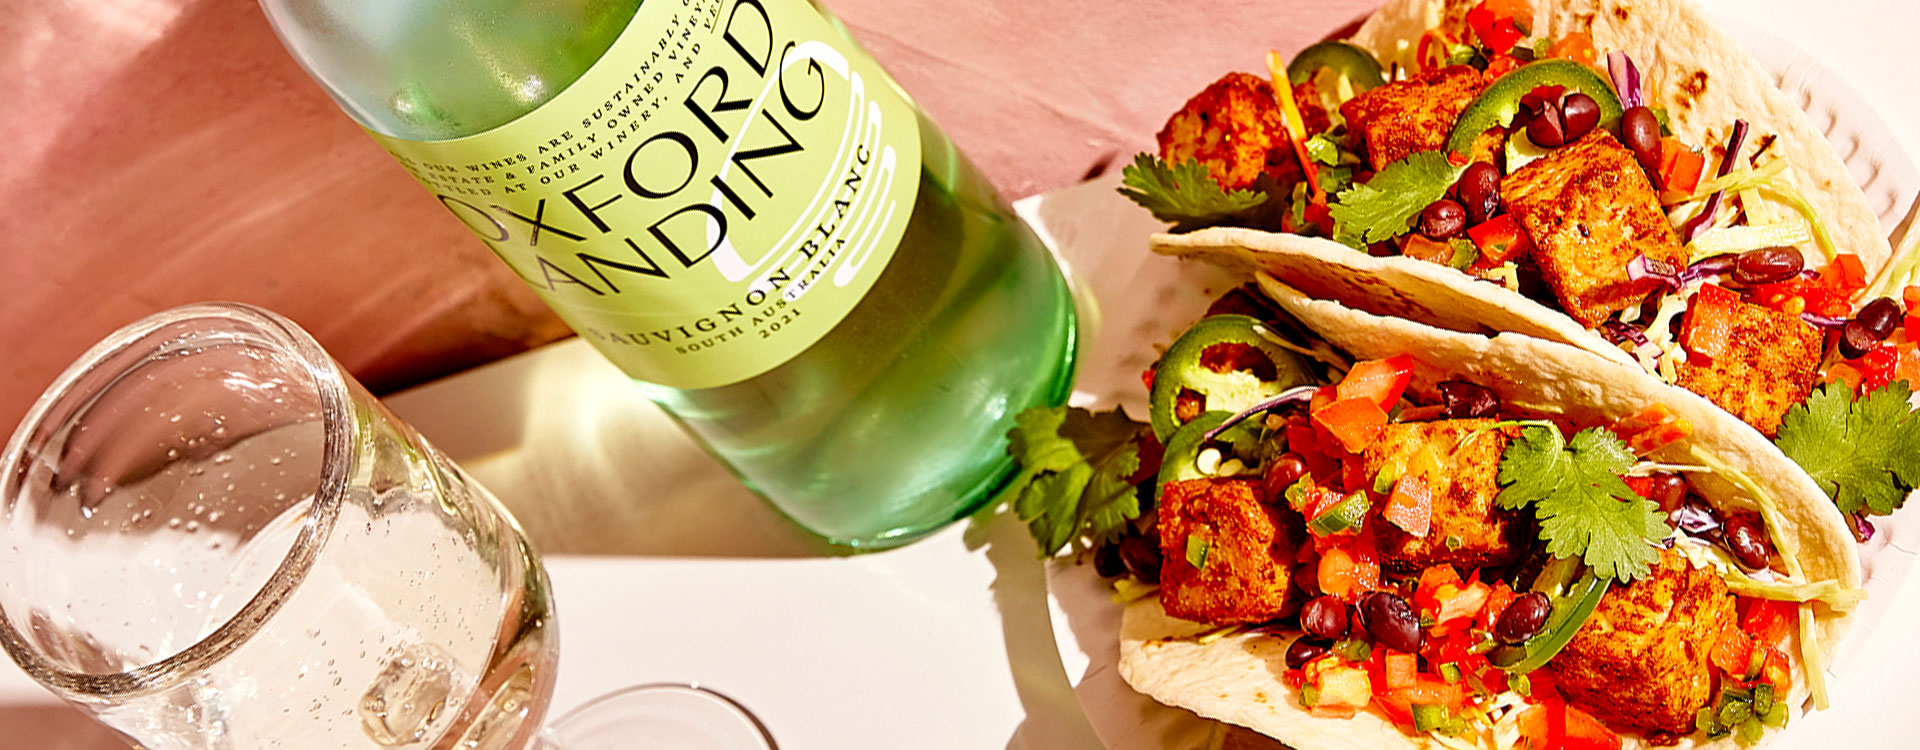 These bright and colourful Tacos, filled with all the usuals - lettuce, jalapenos, tomato, corn, black beans and chipotle sauce, are the perfect summerparty food and a great reason to enjoy a wine with friends - in this case,a refreshing Oxford Landing Sauvignon Blanc. Although… who needs a reason!